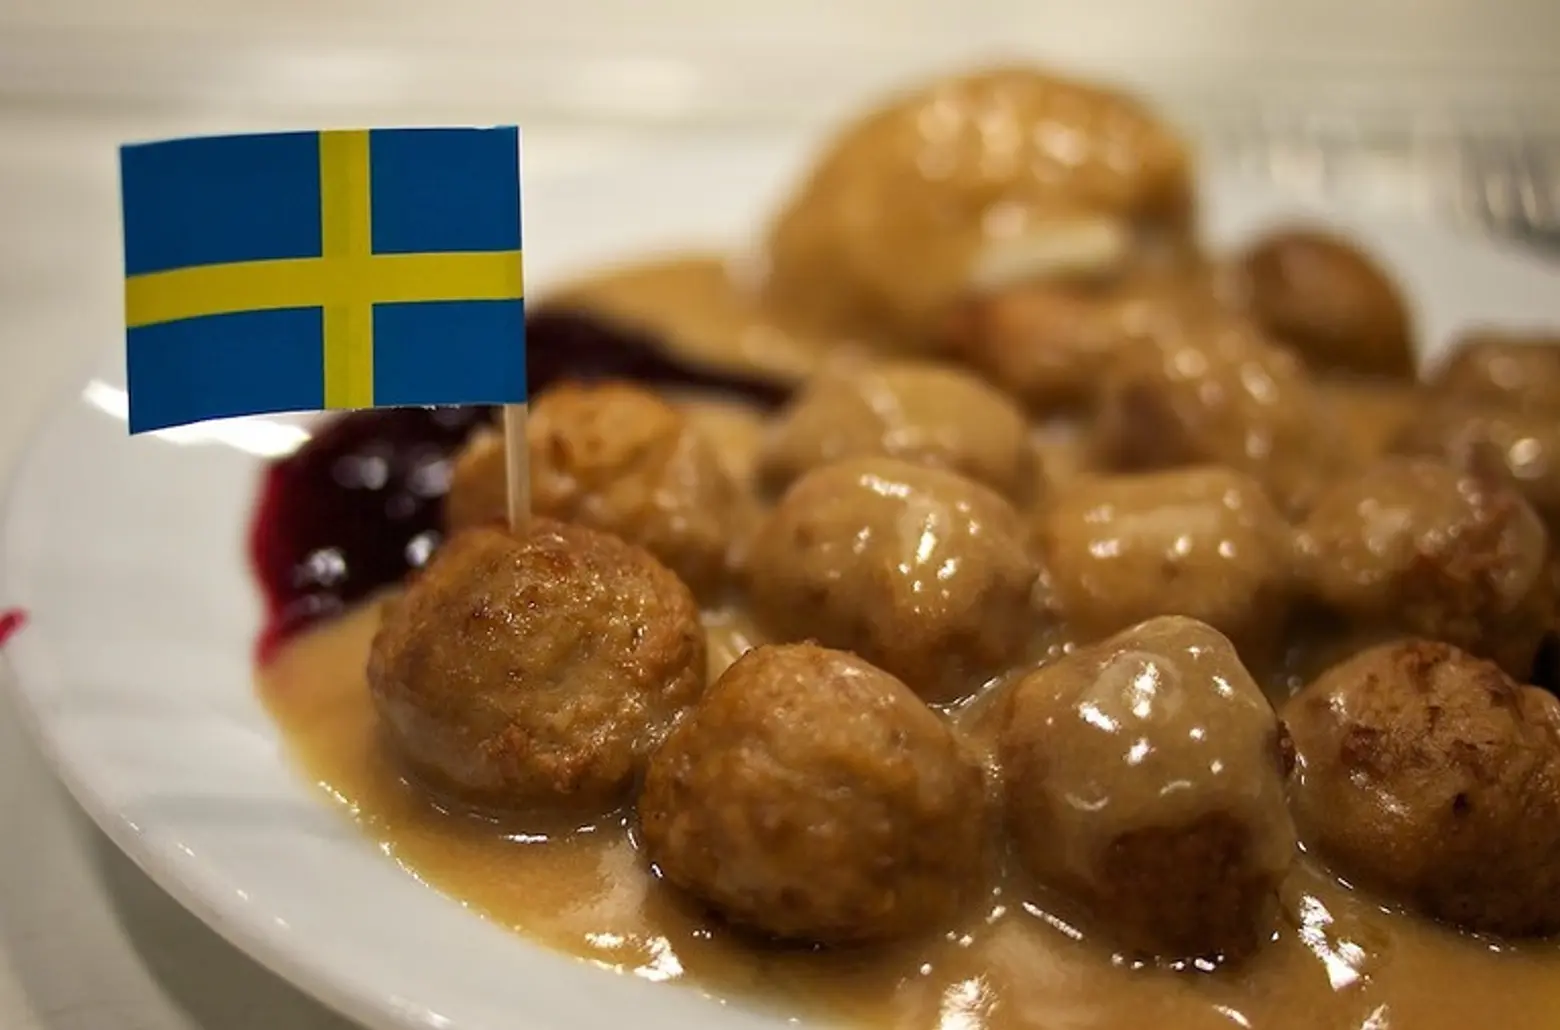 Ikea Is Using Meatballs to Trick You into Buying Furniture; How ‘Seinfeld’ Had a Subway Set